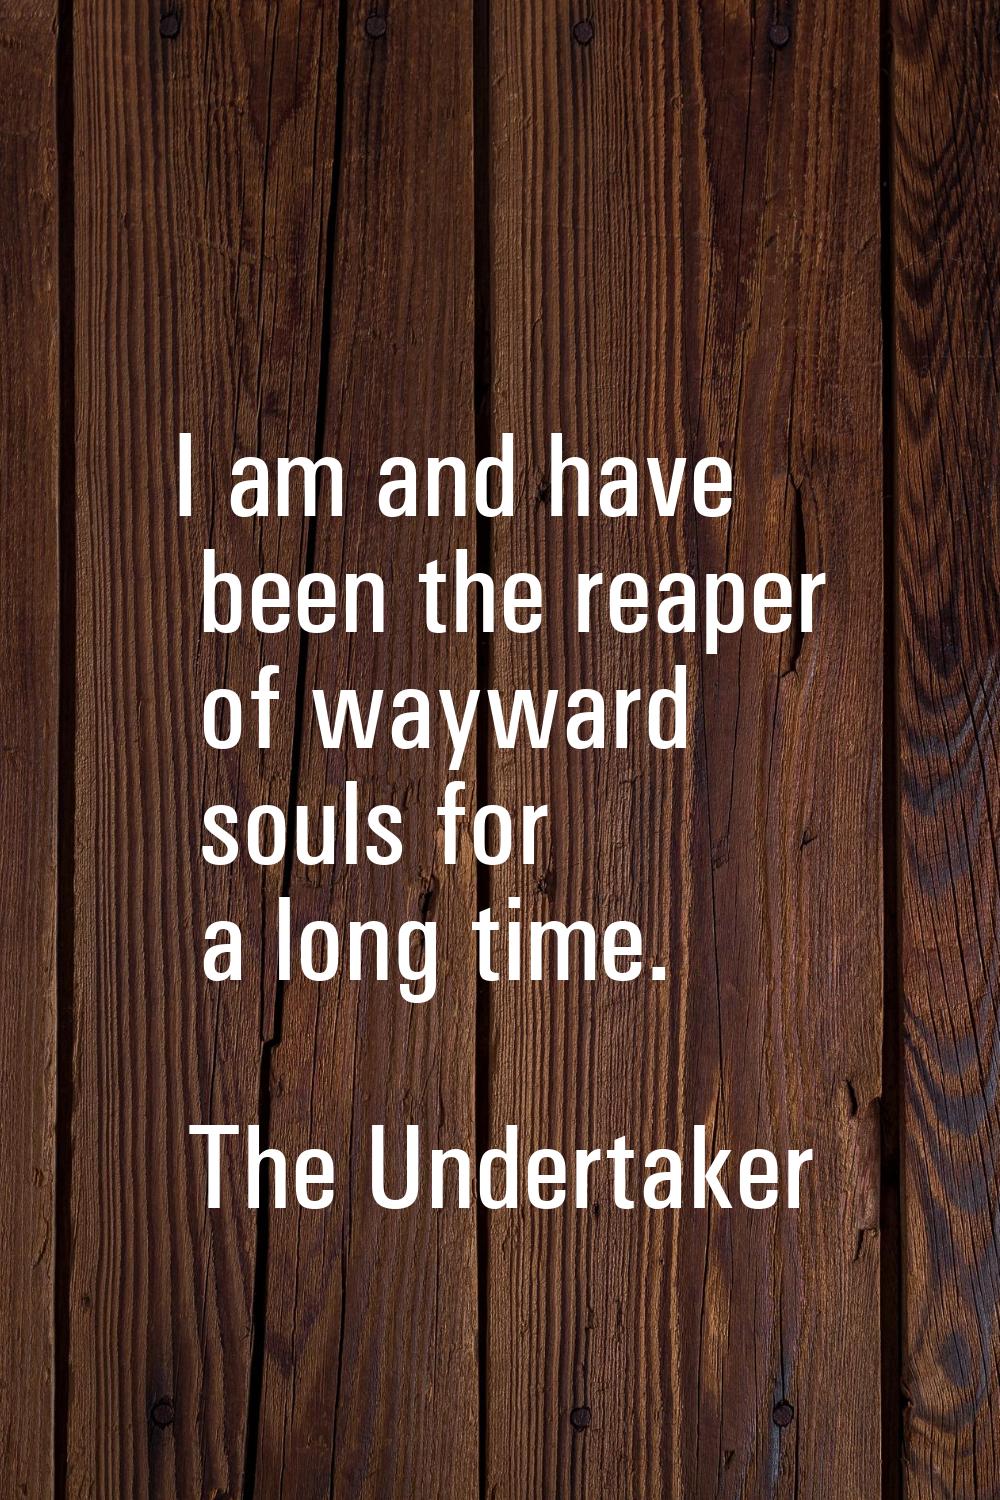 I am and have been the reaper of wayward souls for a long time.